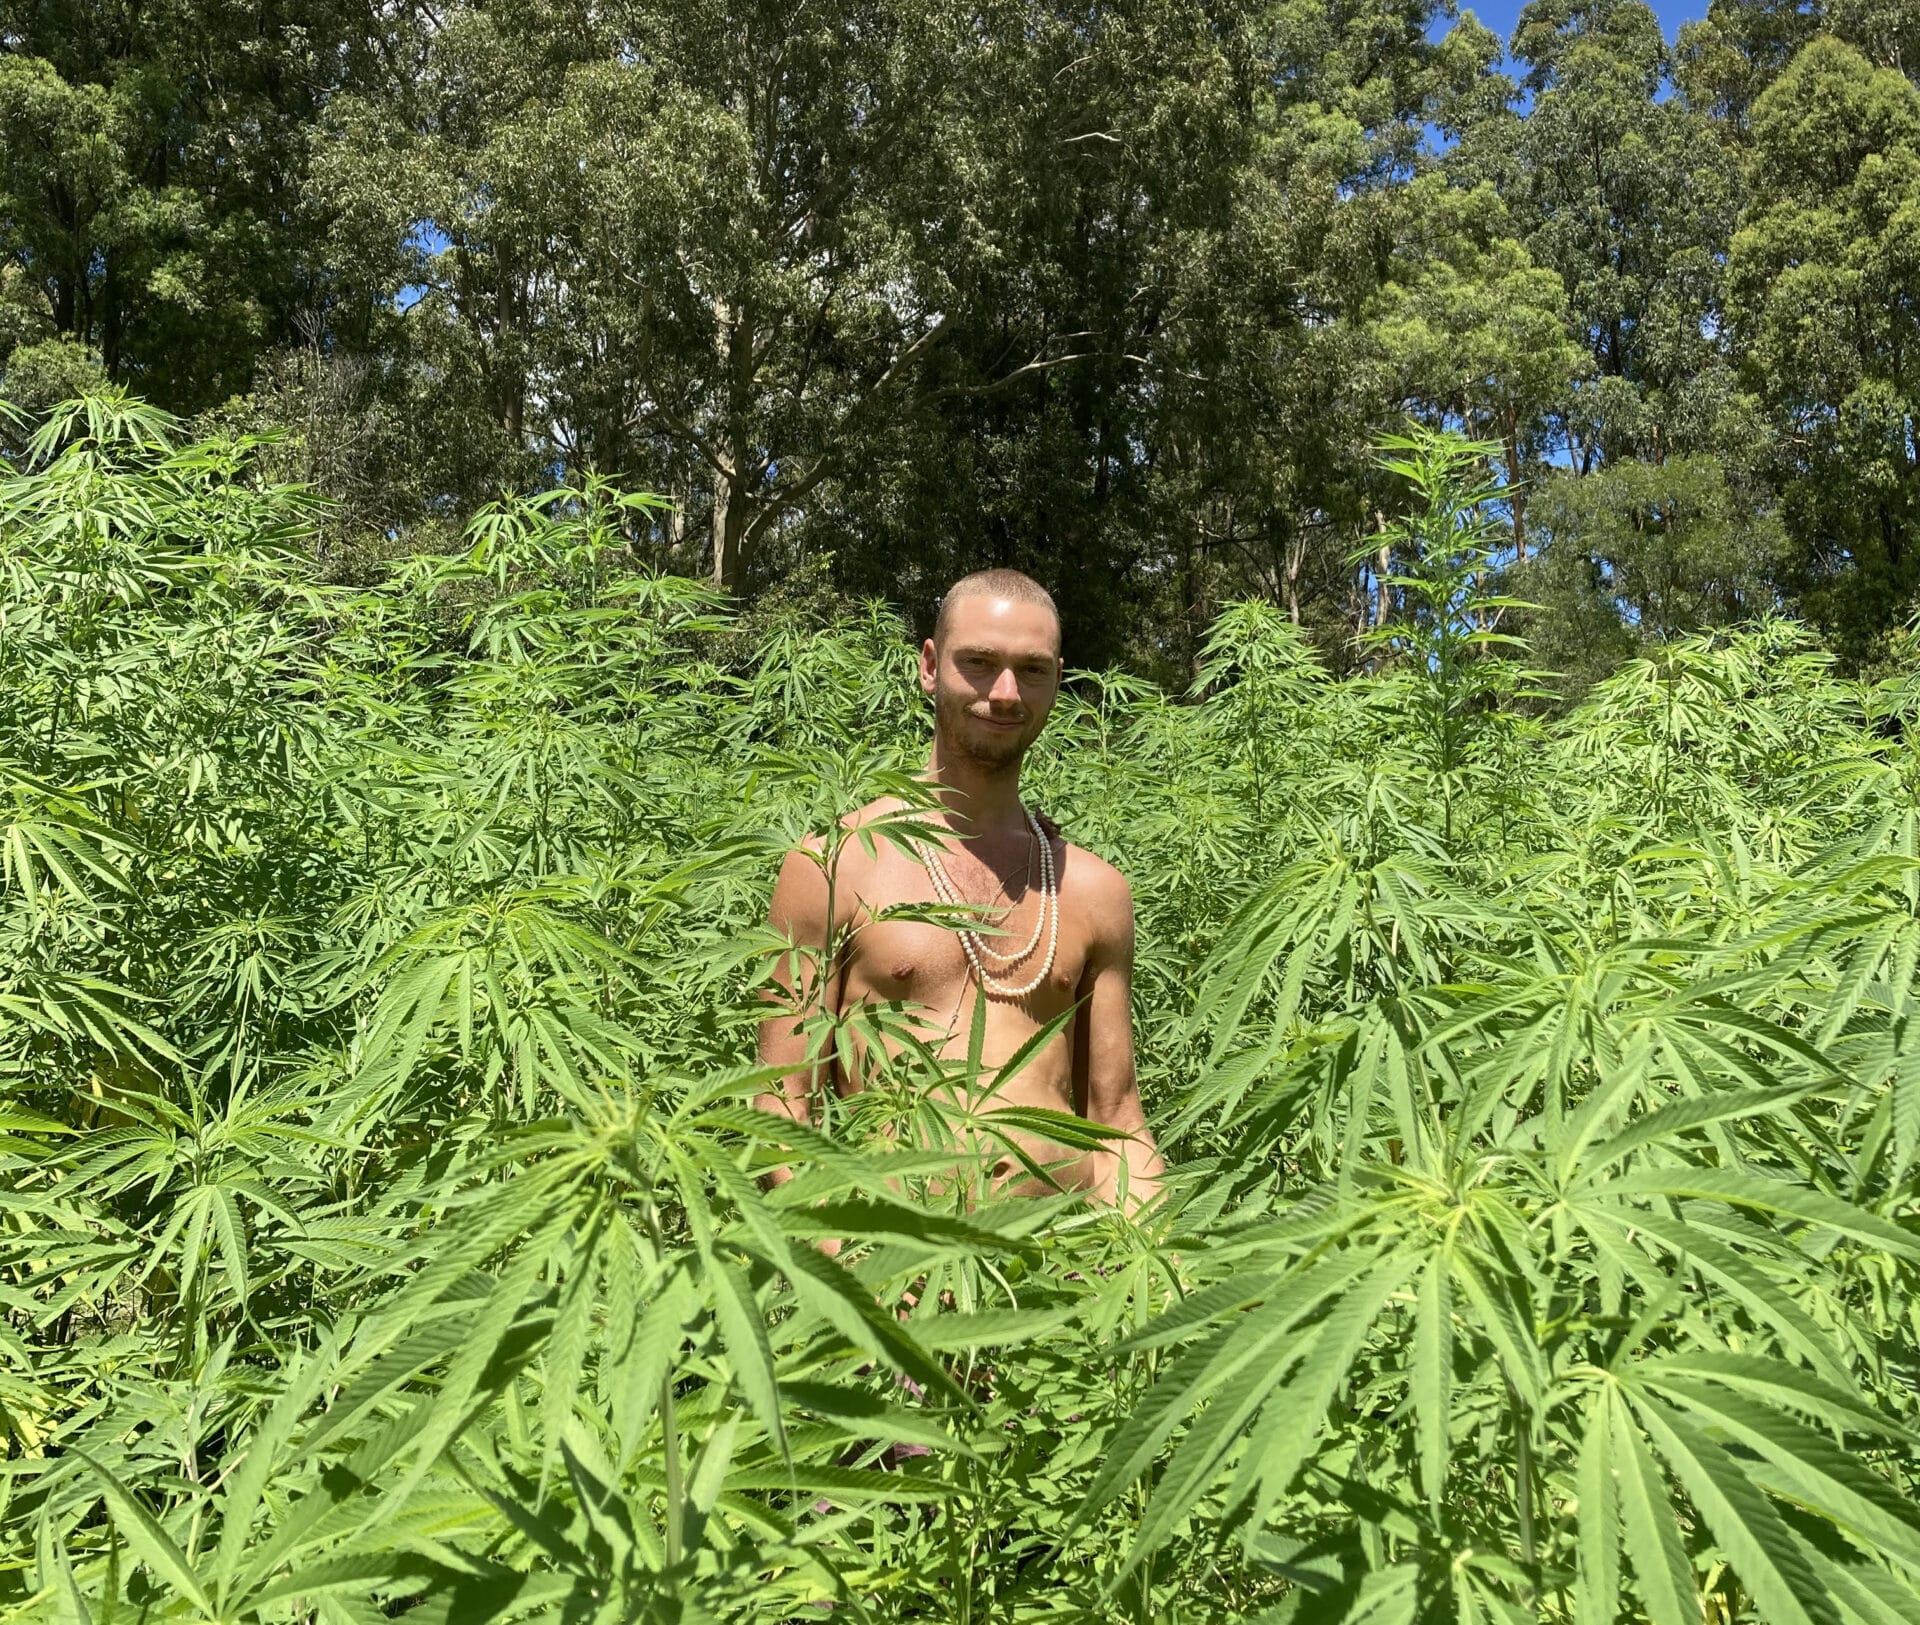 Dylan Smith surrounded by Cannabis Plants